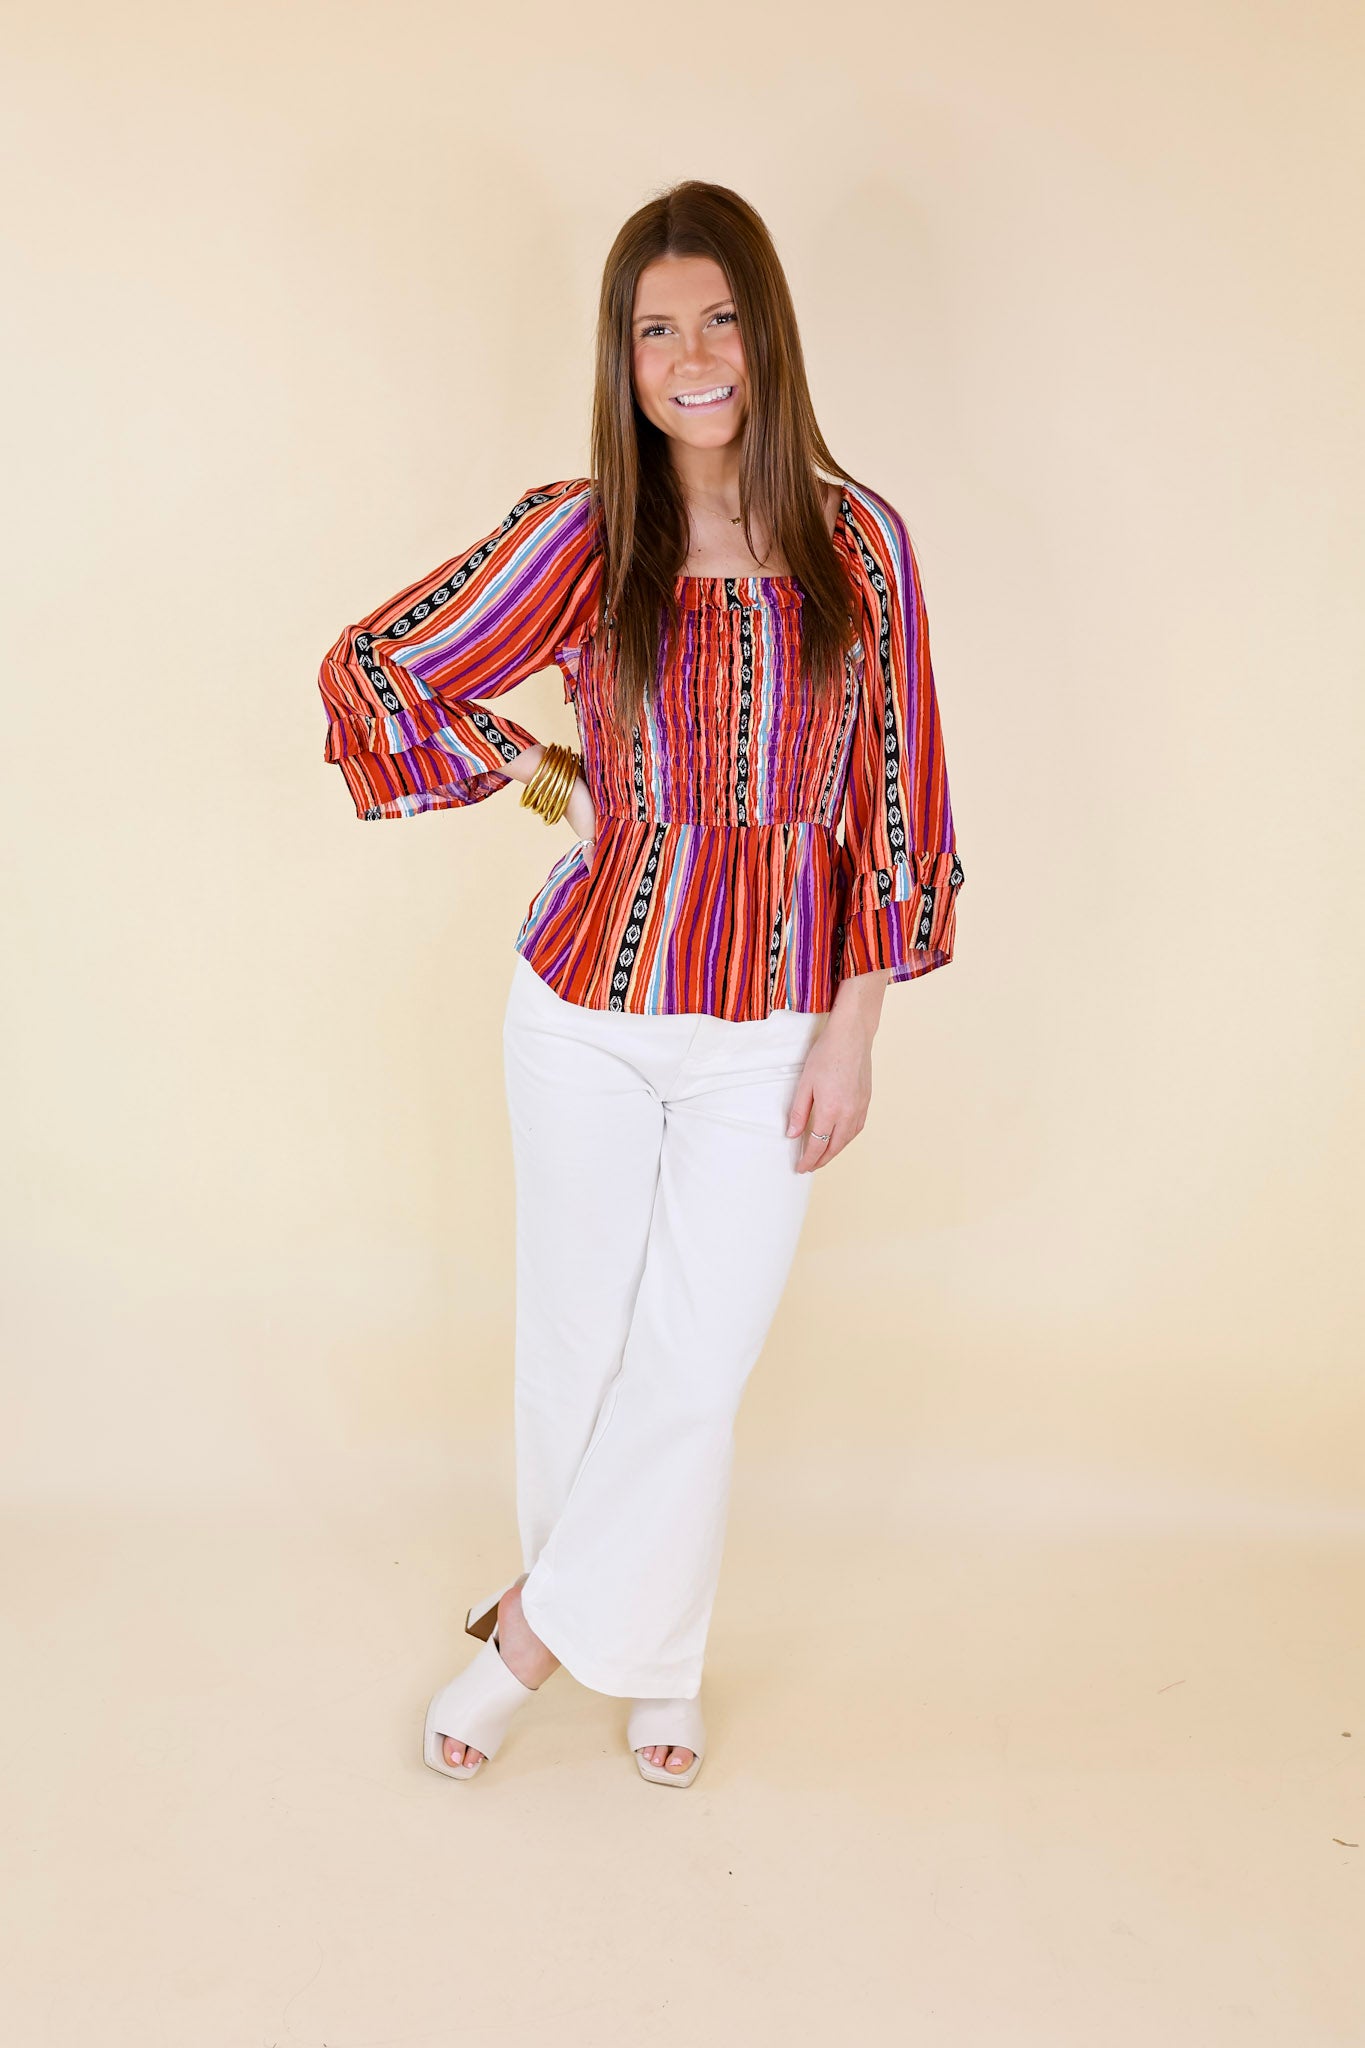 Blissful Break Serape Print Peplum Top with Smocked Bodice in Rust Orange Mix - Giddy Up Glamour Boutique